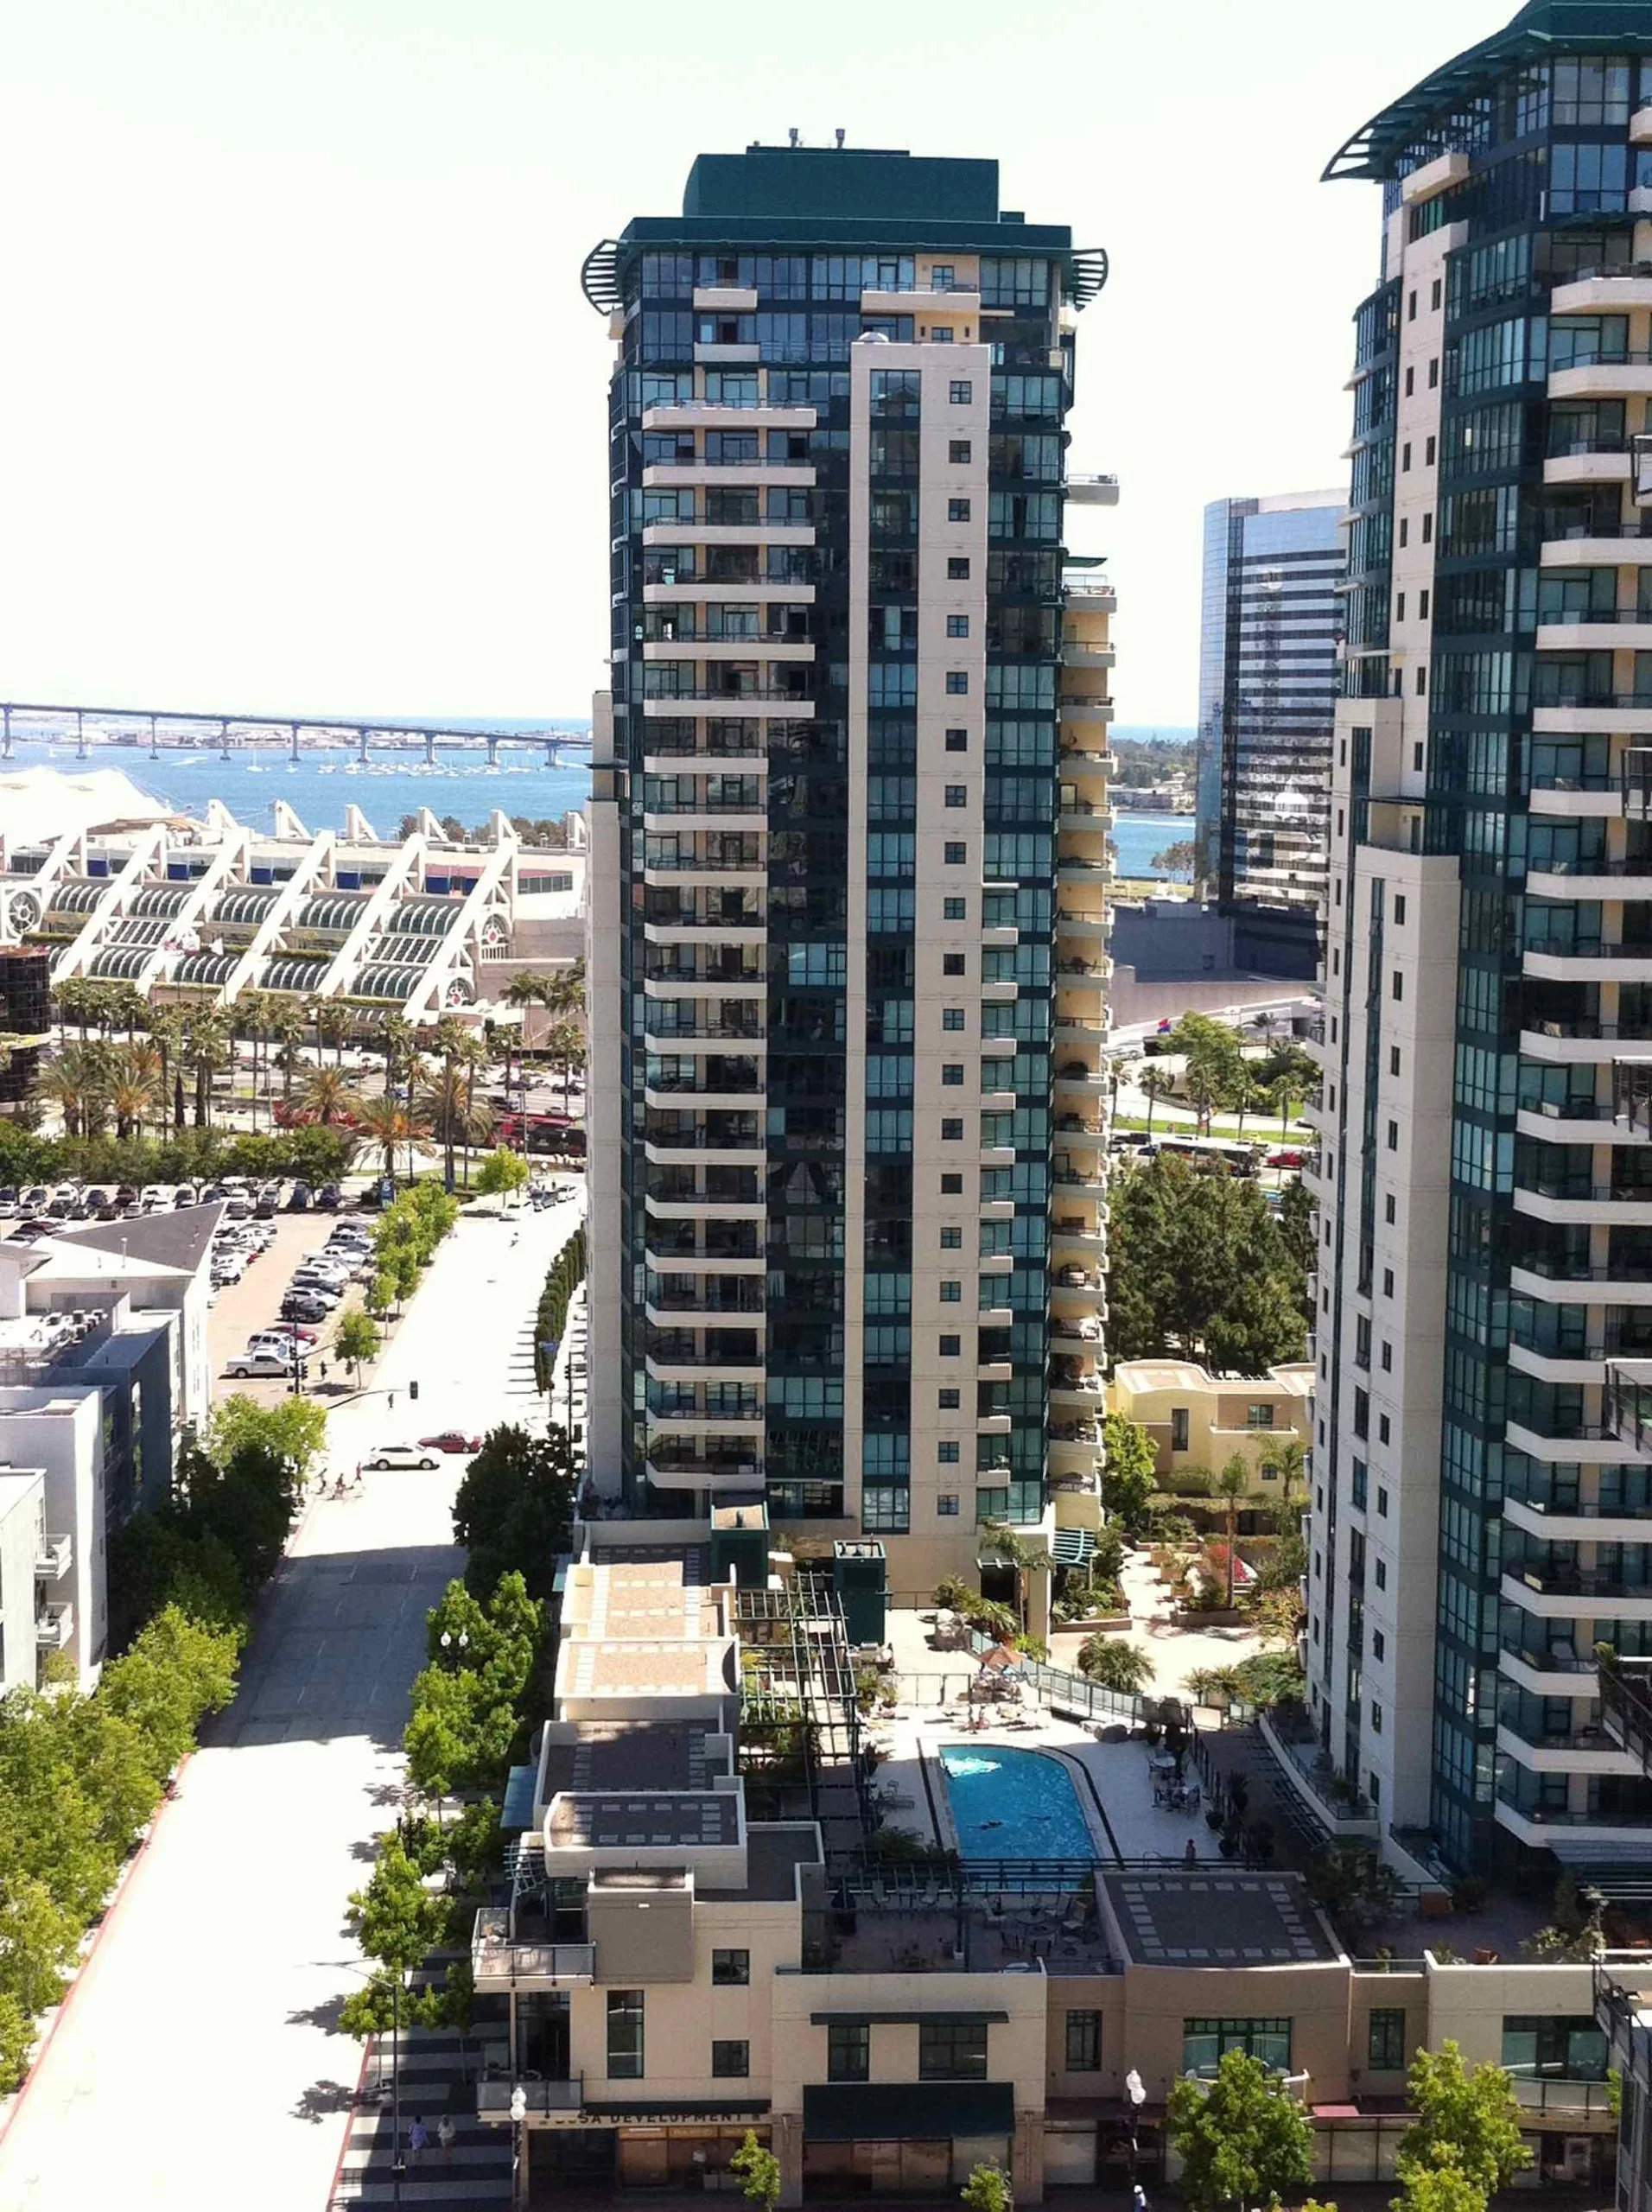 Two condo towers in downtown San Diego Marina